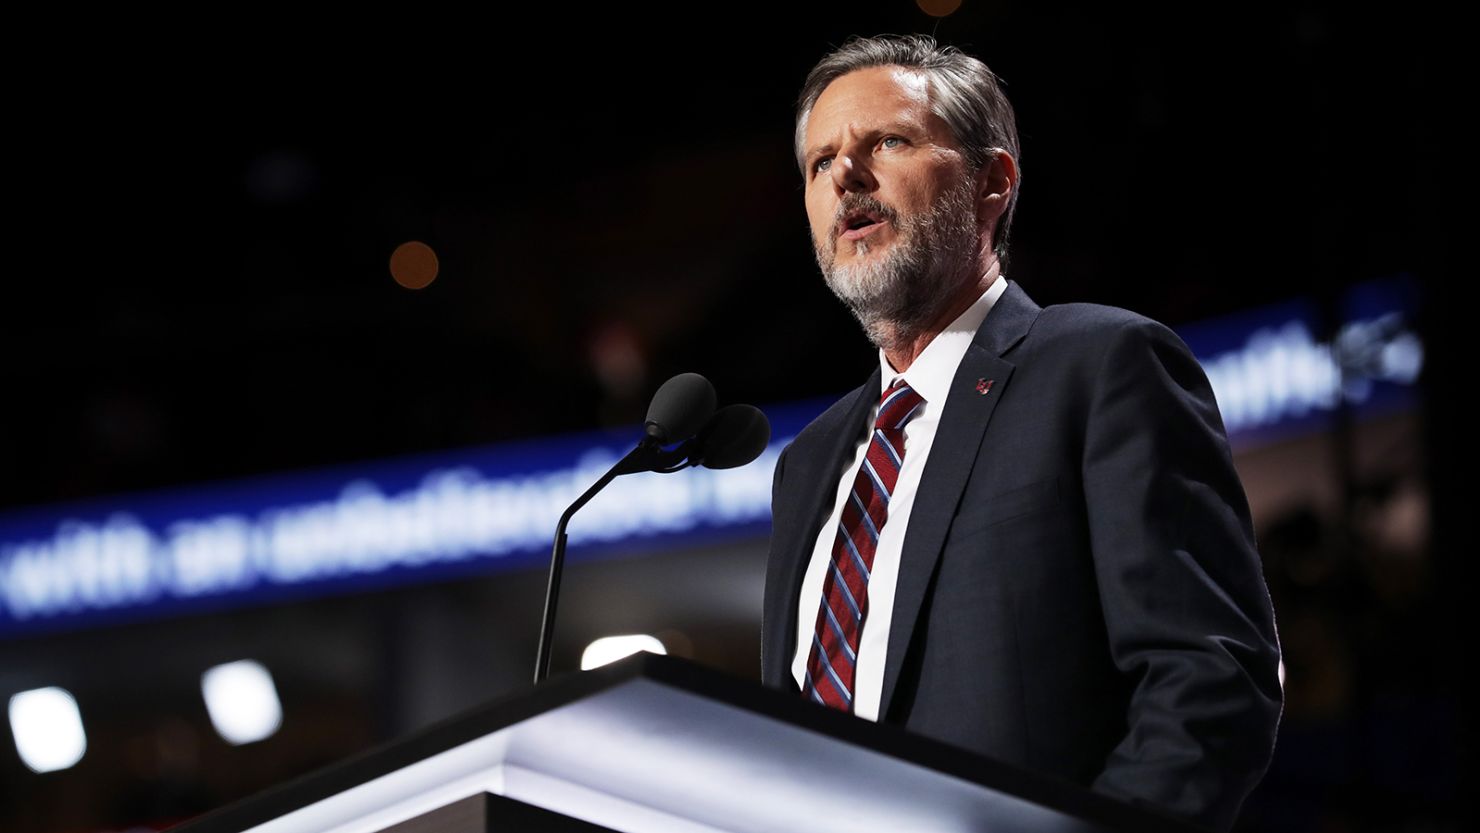 A replacement for former Liberty University President Jerry Falwell has been announced by the university.